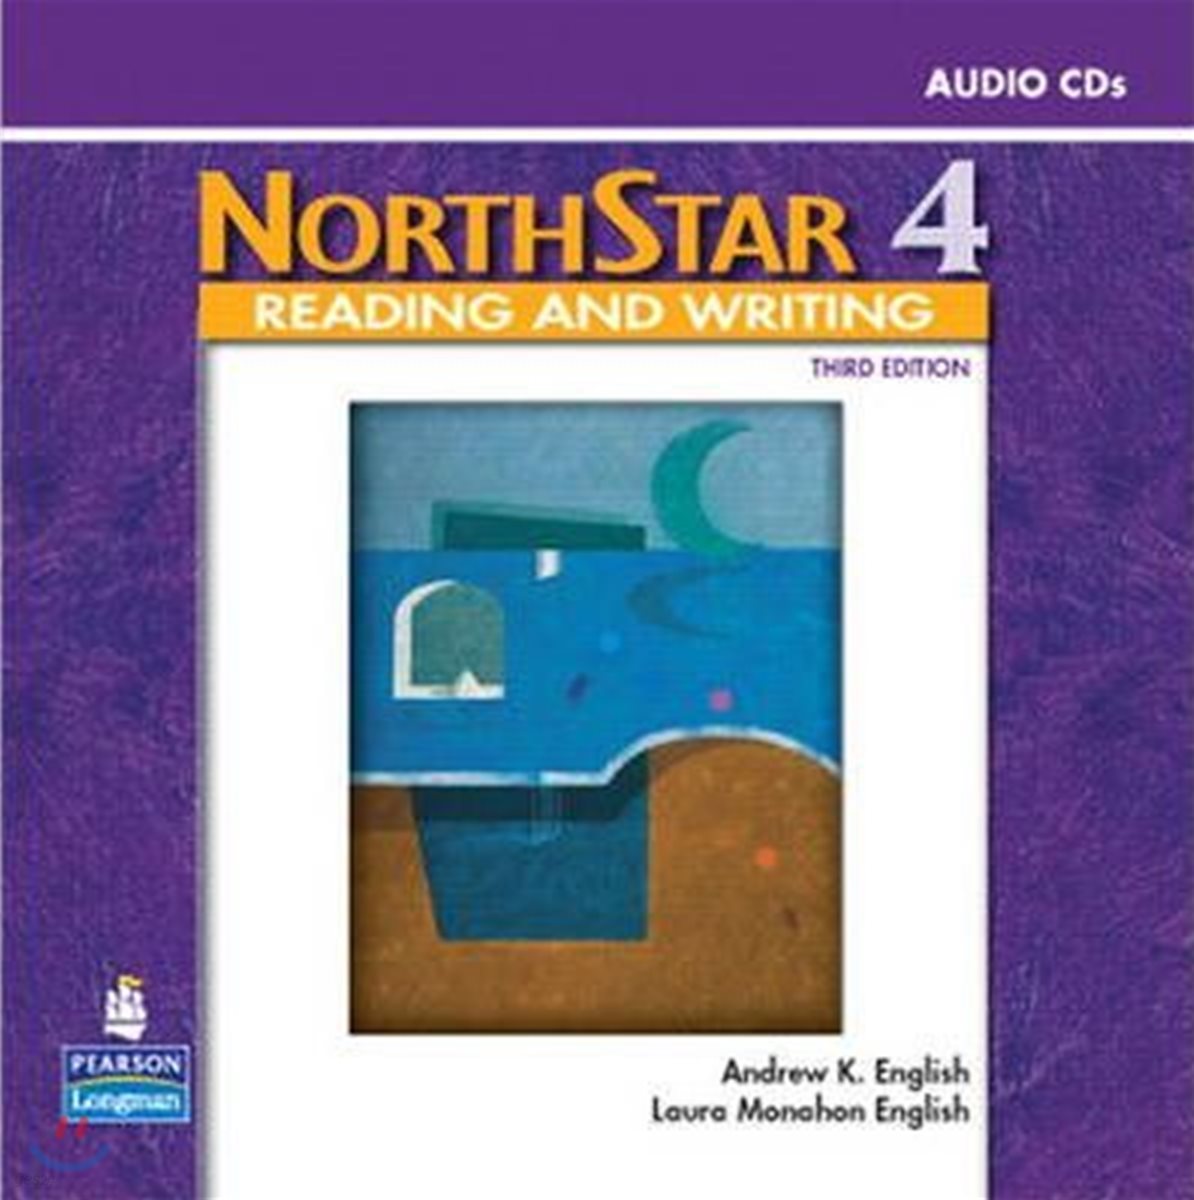 NorthStar Reading and Writing Level CD 예스24